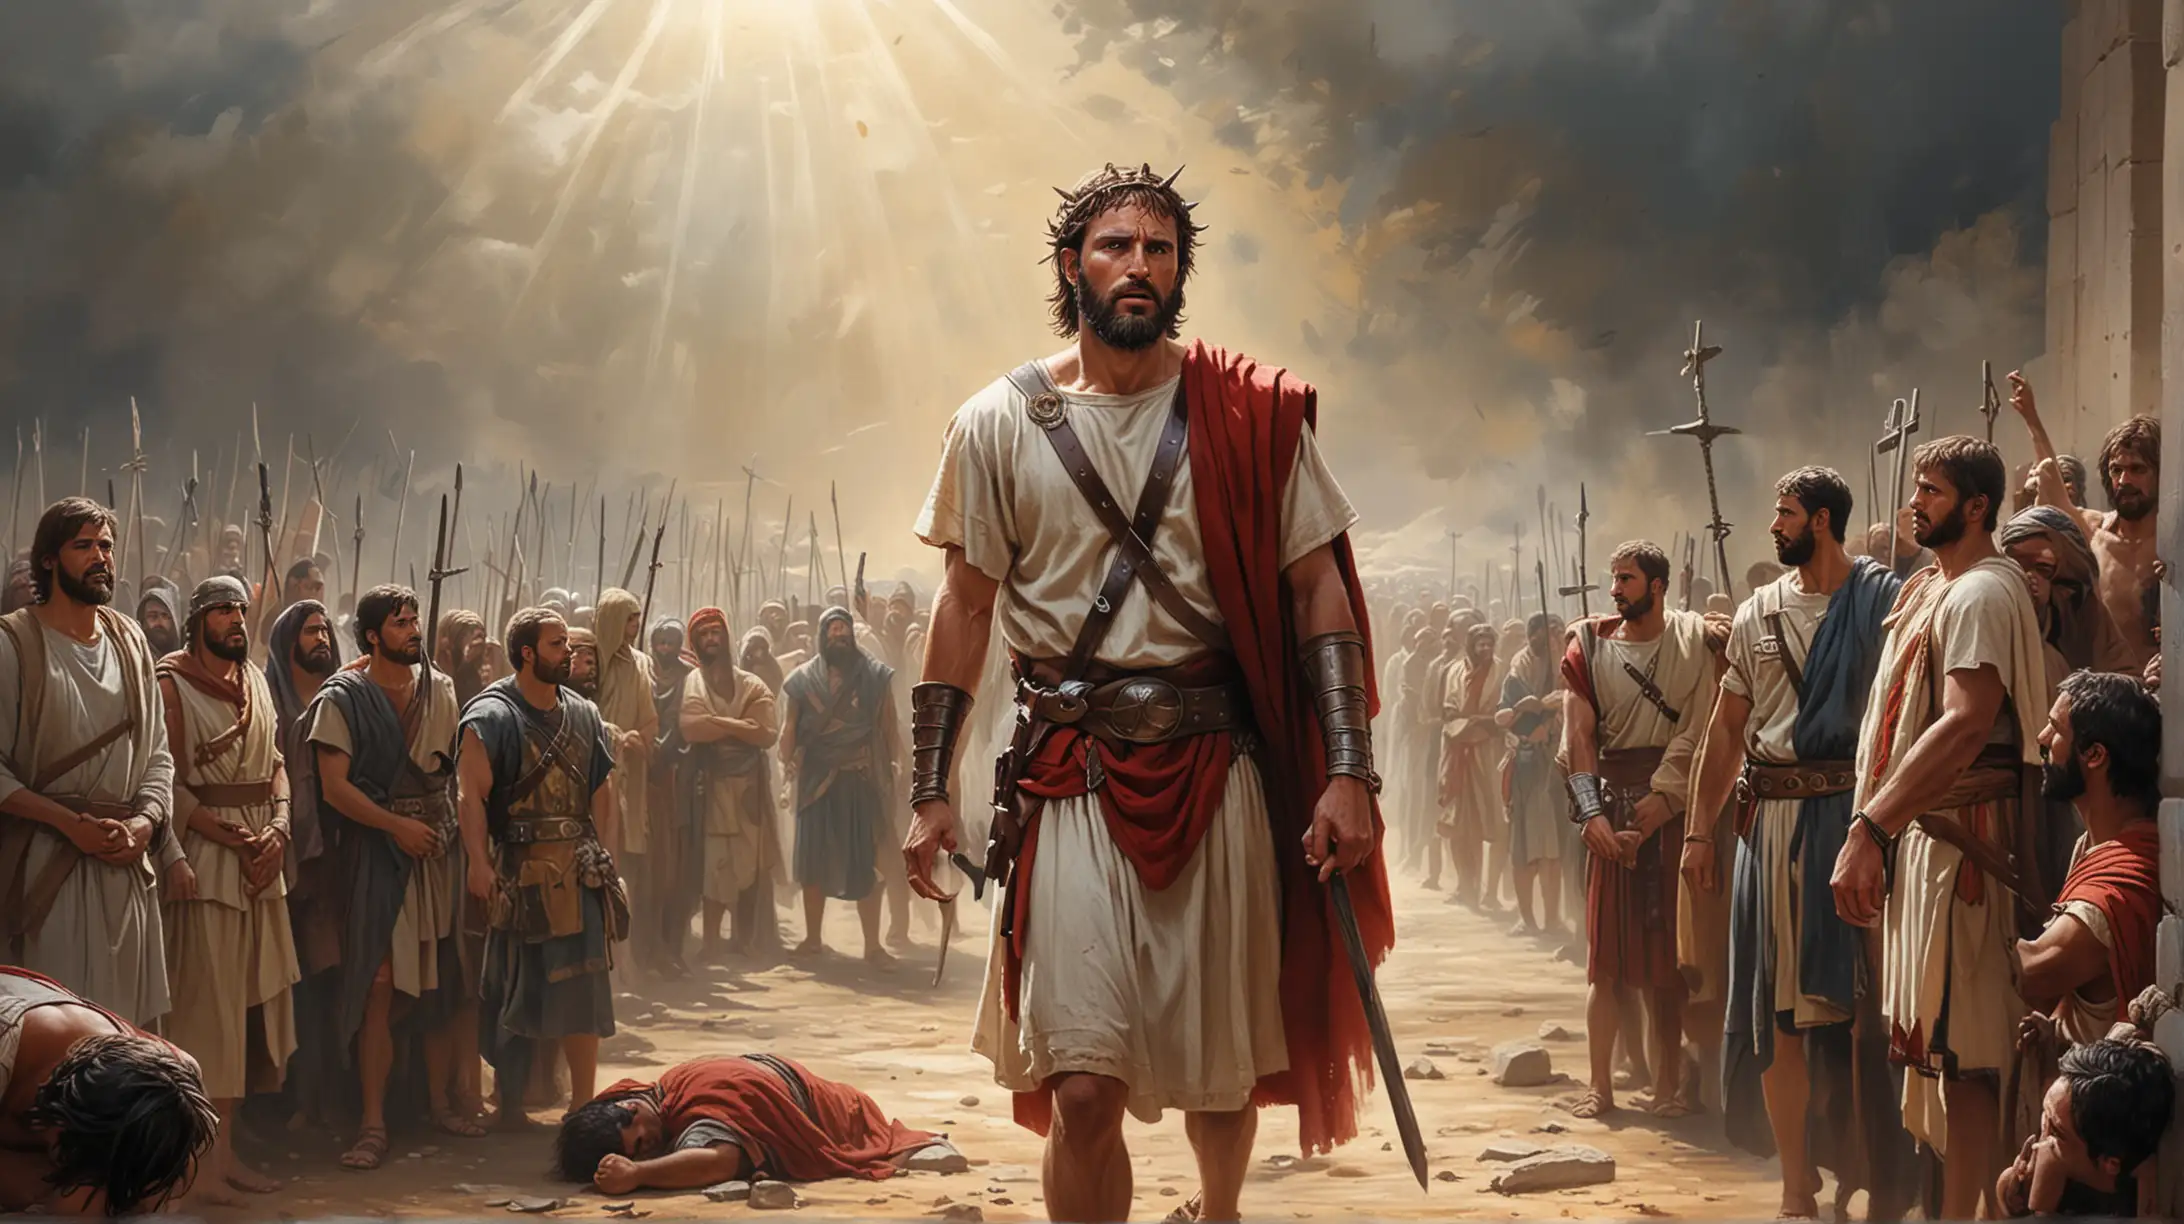 An impactful illustration depicting the Centurion's realization of Jesus' innocence amidst the injustice of his arrest, trial, and crucifixion, with emphasis on Jesus' bold affirmation of his identity as the Son of God, as recorded in Matthew 26:62-64.